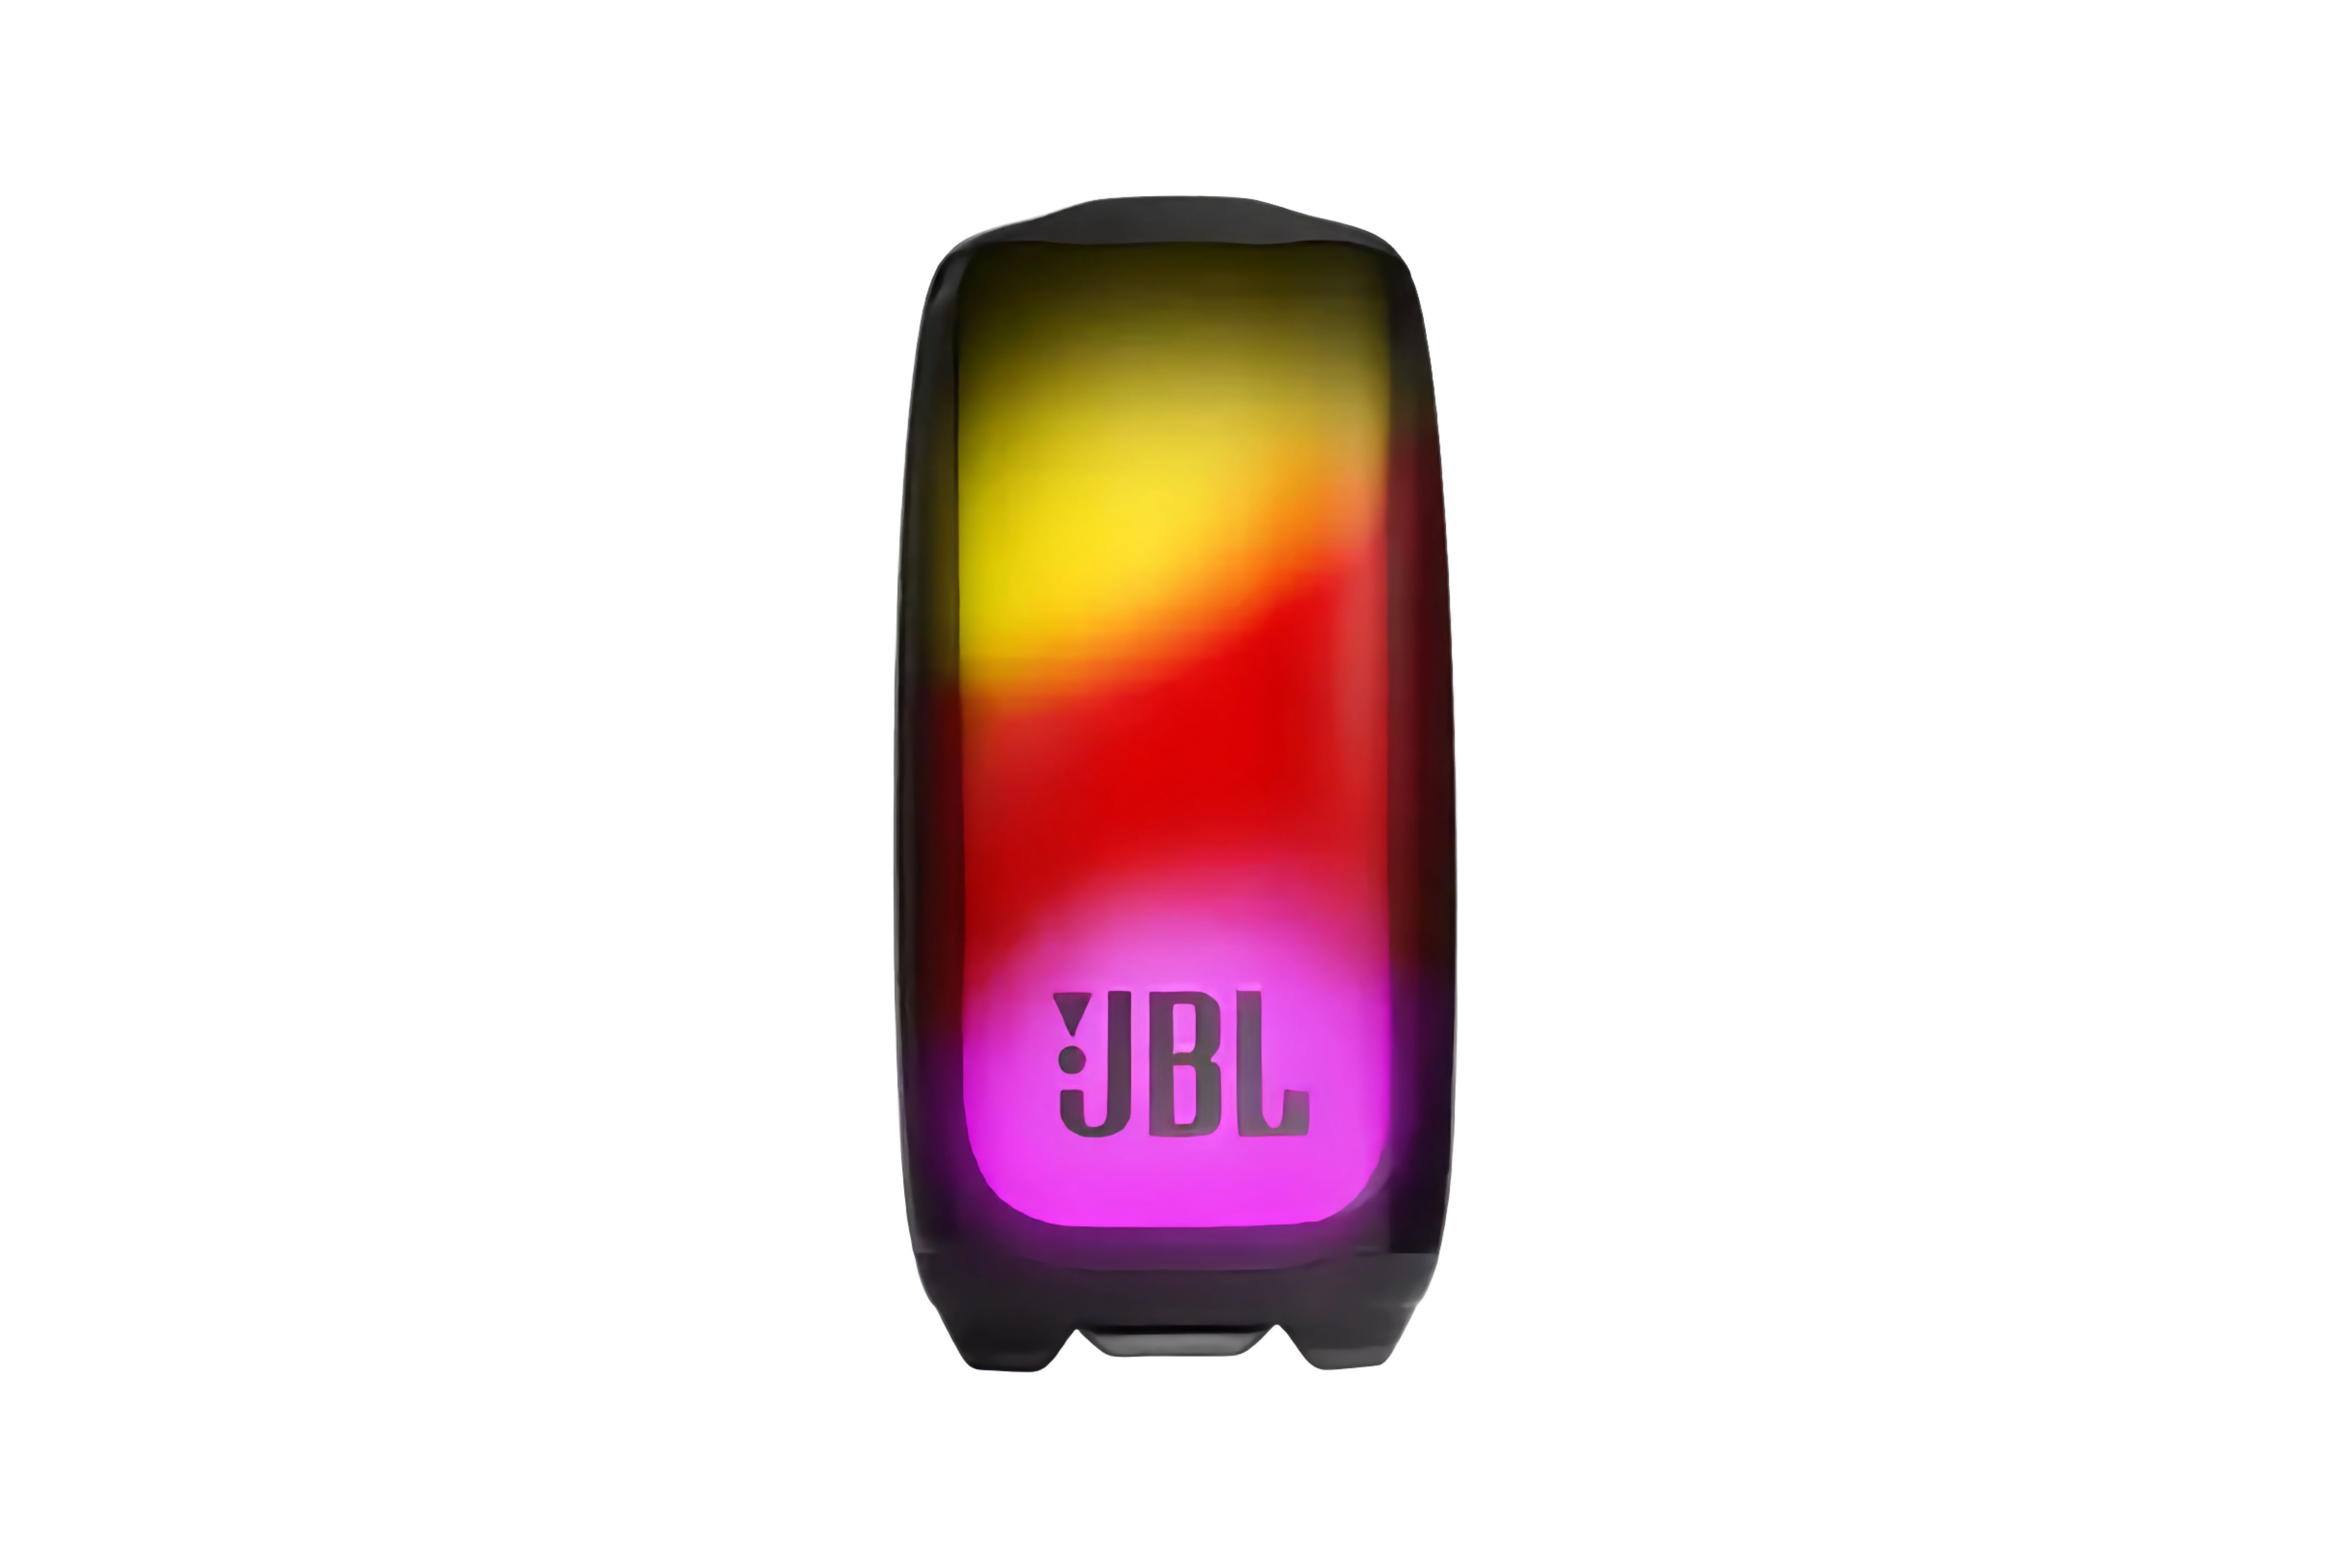 A tube-shaped, rainbow-colored Bluetooth speaker with JBL printed on the side.